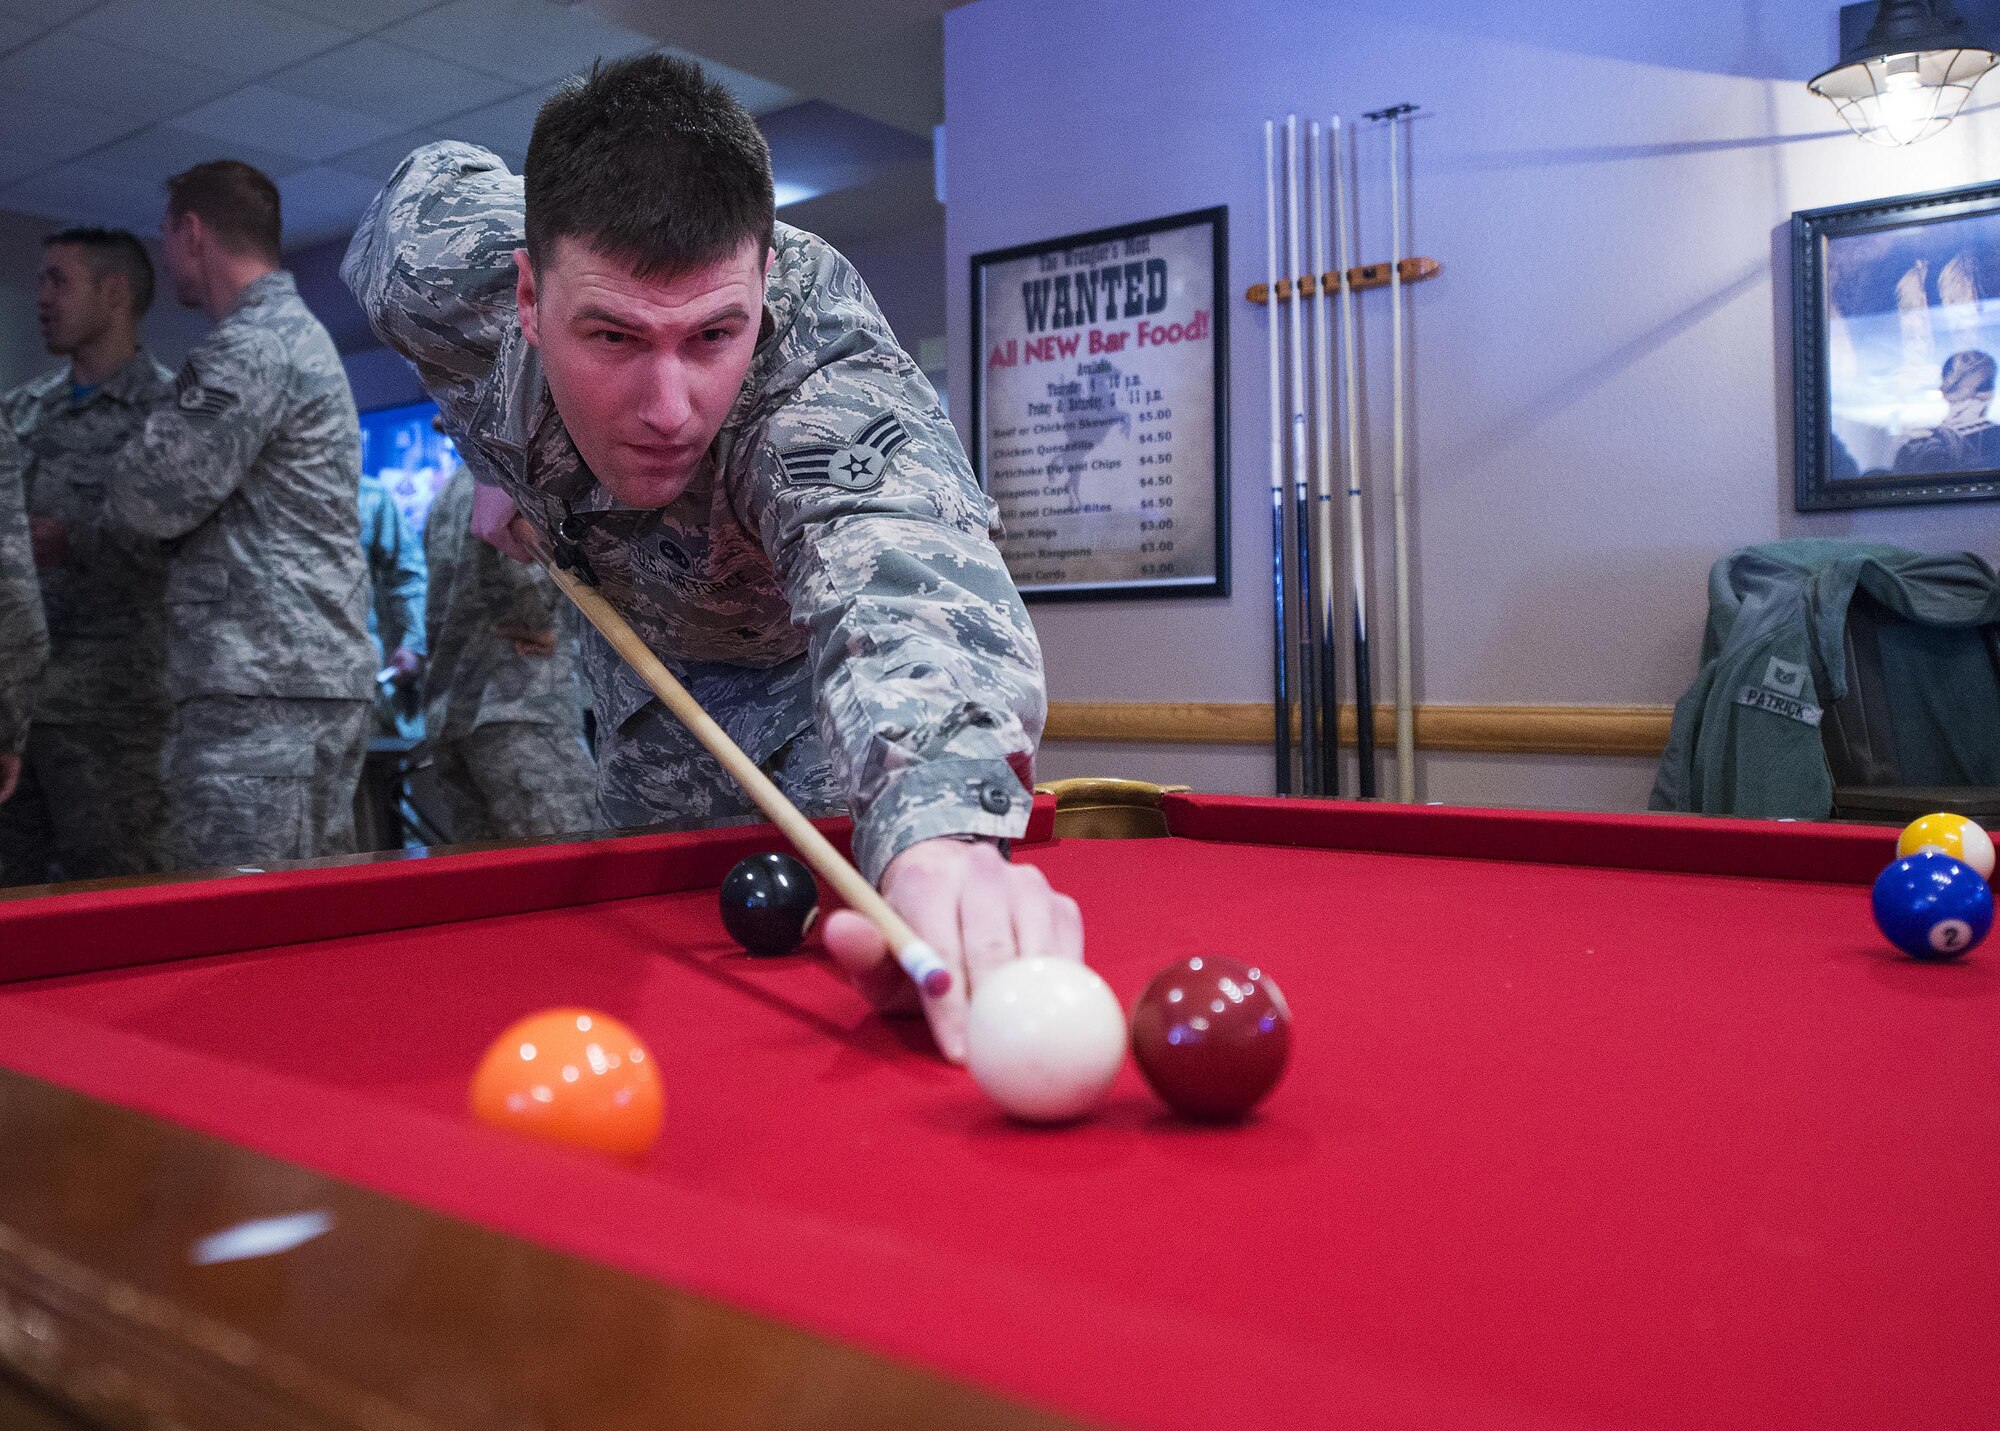 Senior Airman Tom O’Conner, 90th Munitions Squadron, takes aim during a pool game April 1, 2016, in the Trail’s End Event Center’s Wrangler Lounge on F.E. Warren Air Force Base, Wyo.  O’Conner was taking part in the event center’s reopening after being closed for several months for refurbishing. (U.S. Air Force photo by R.J. Oriez)